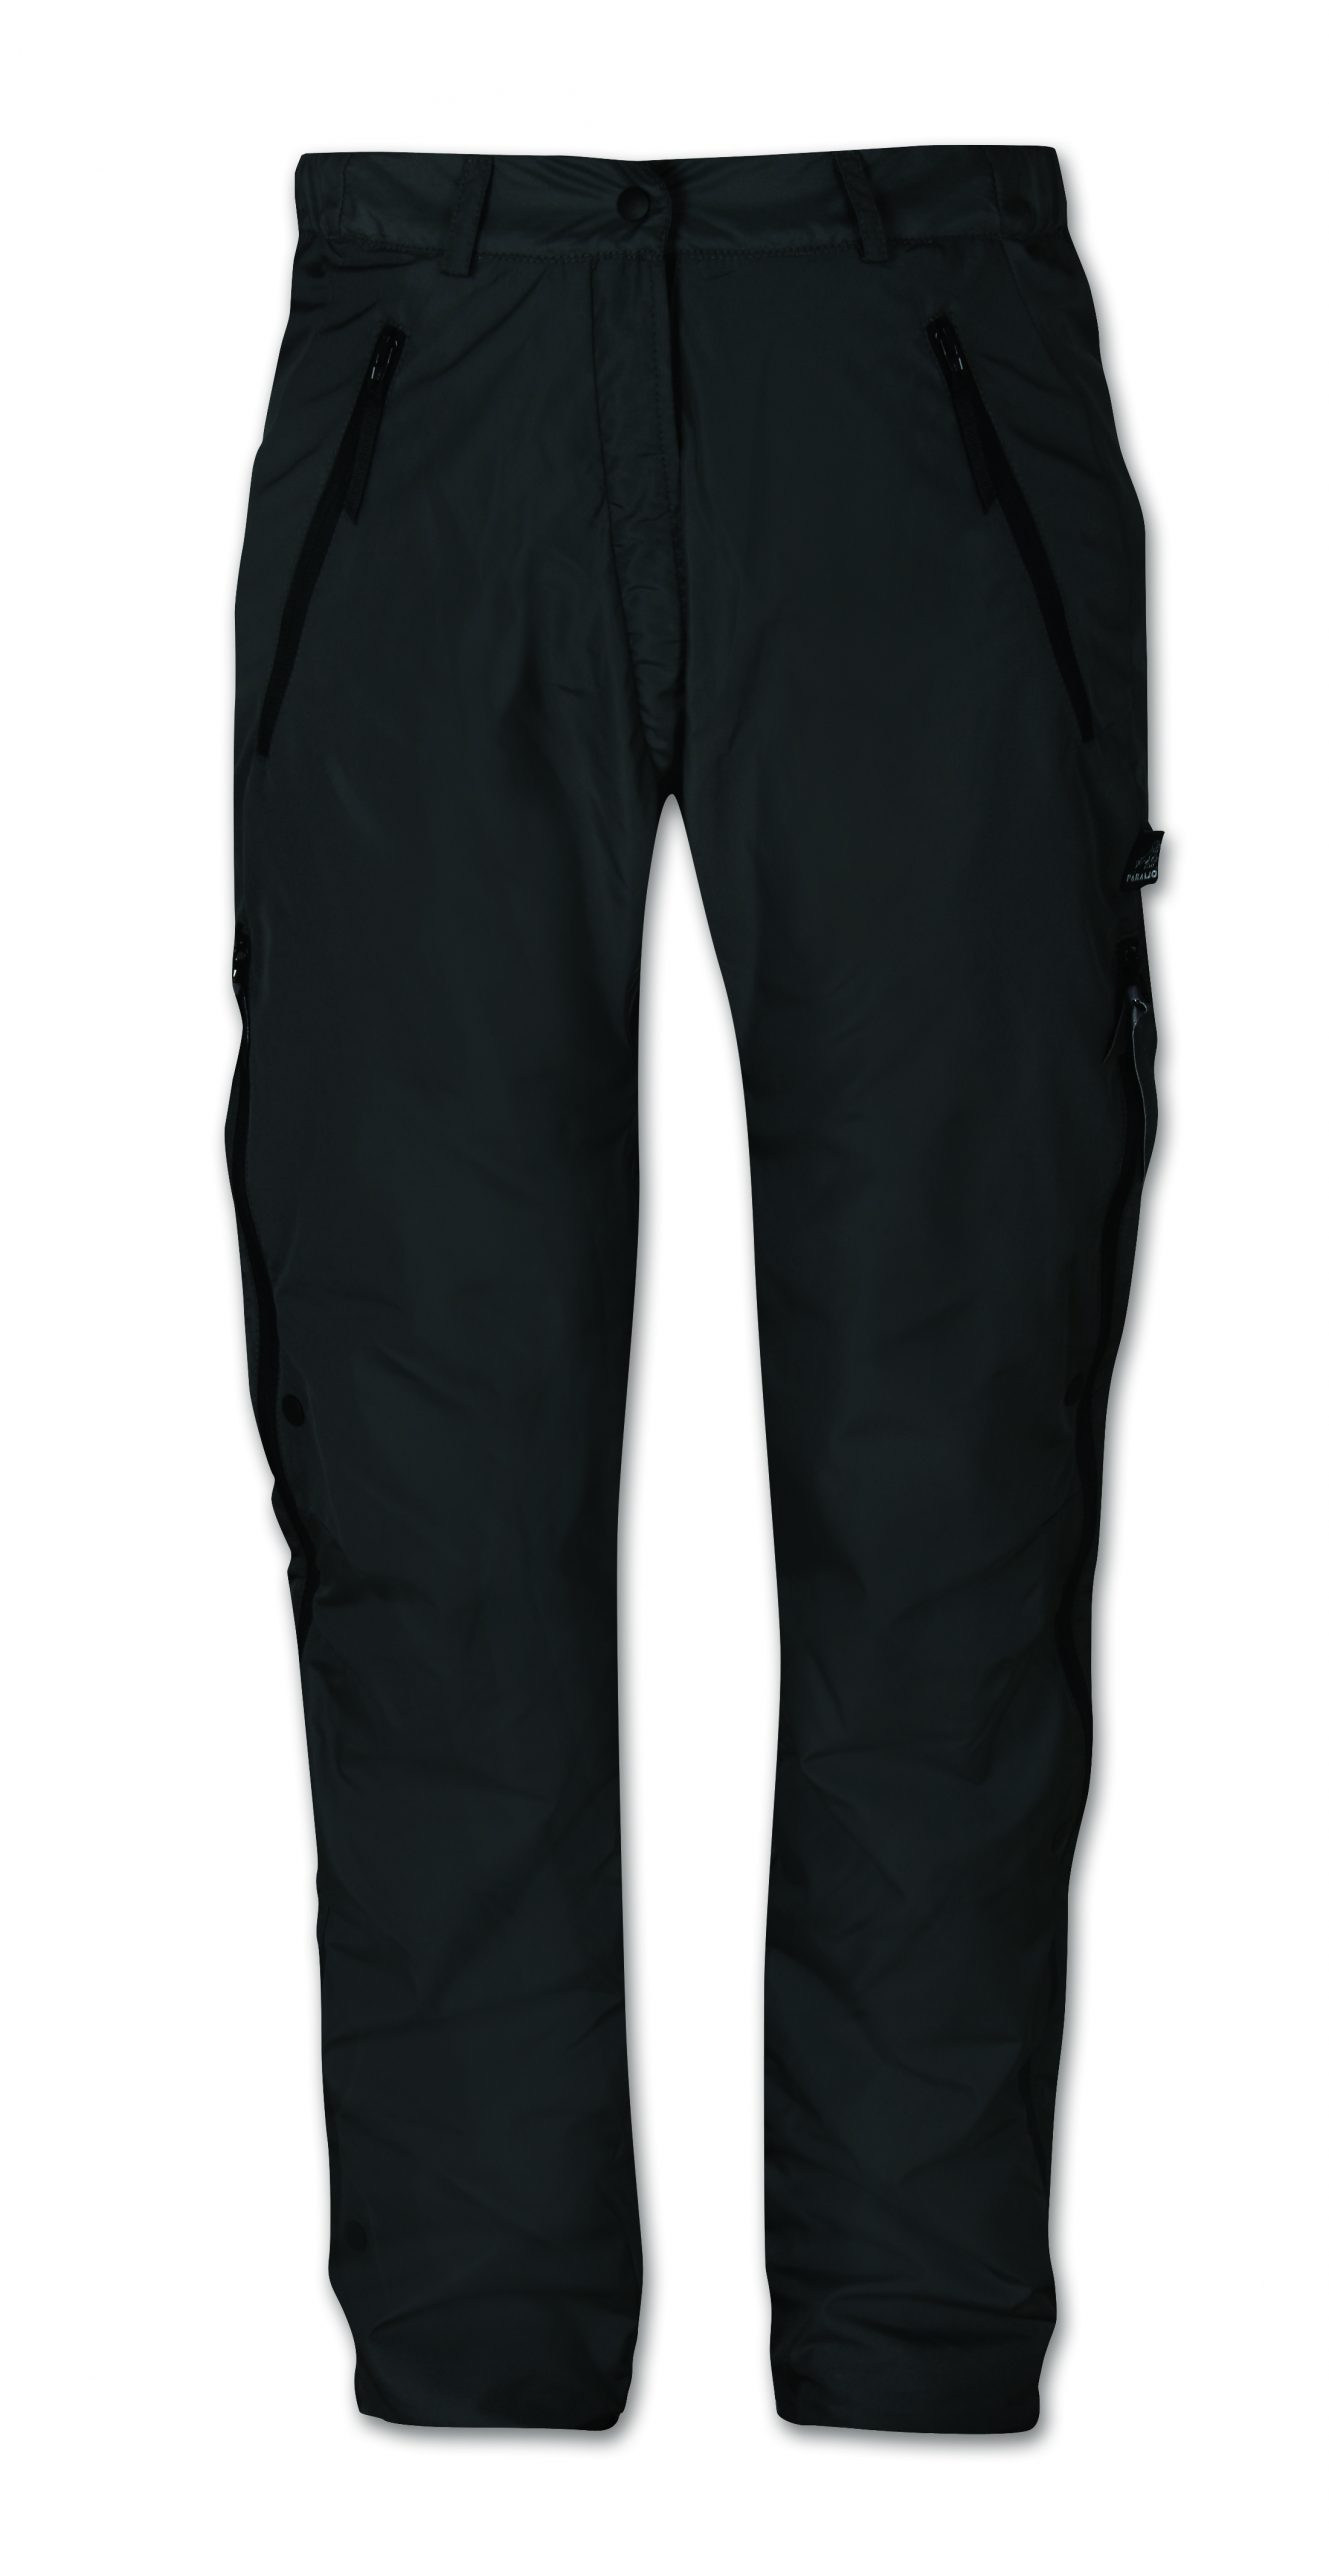 Buy a Paramo Ladies' Cascada 2 Trousers from The Mountaineer, Paramo ...